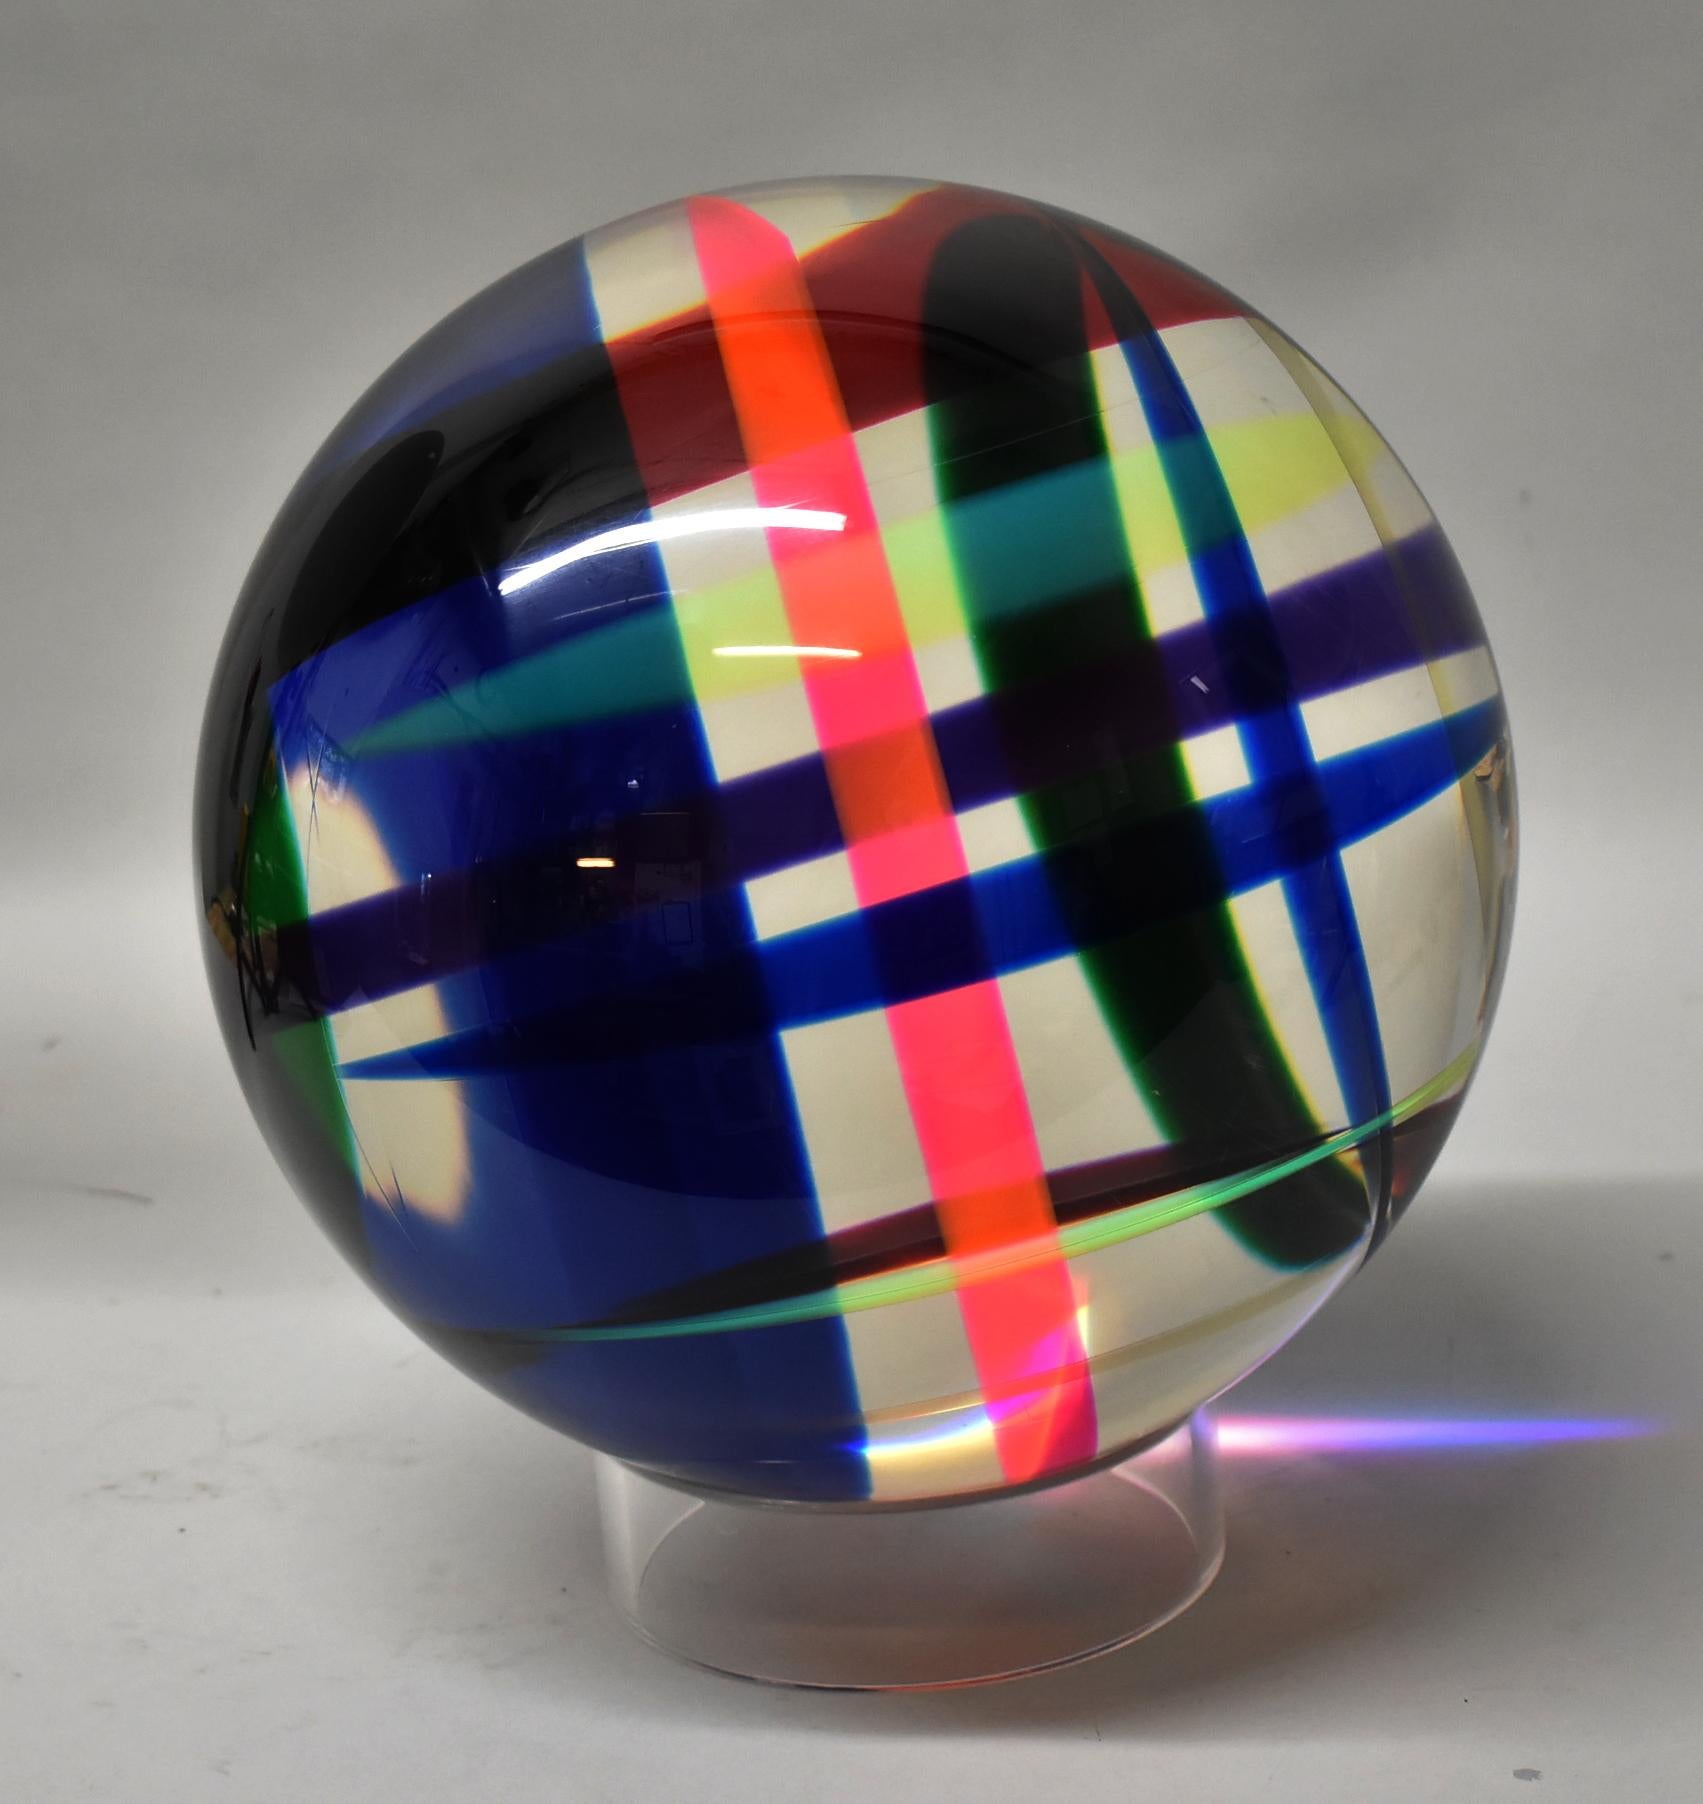 Late 20th Century Velizar Vasa Mihich Multi Colored Sculpture Acrylic Sphere Signed 1993